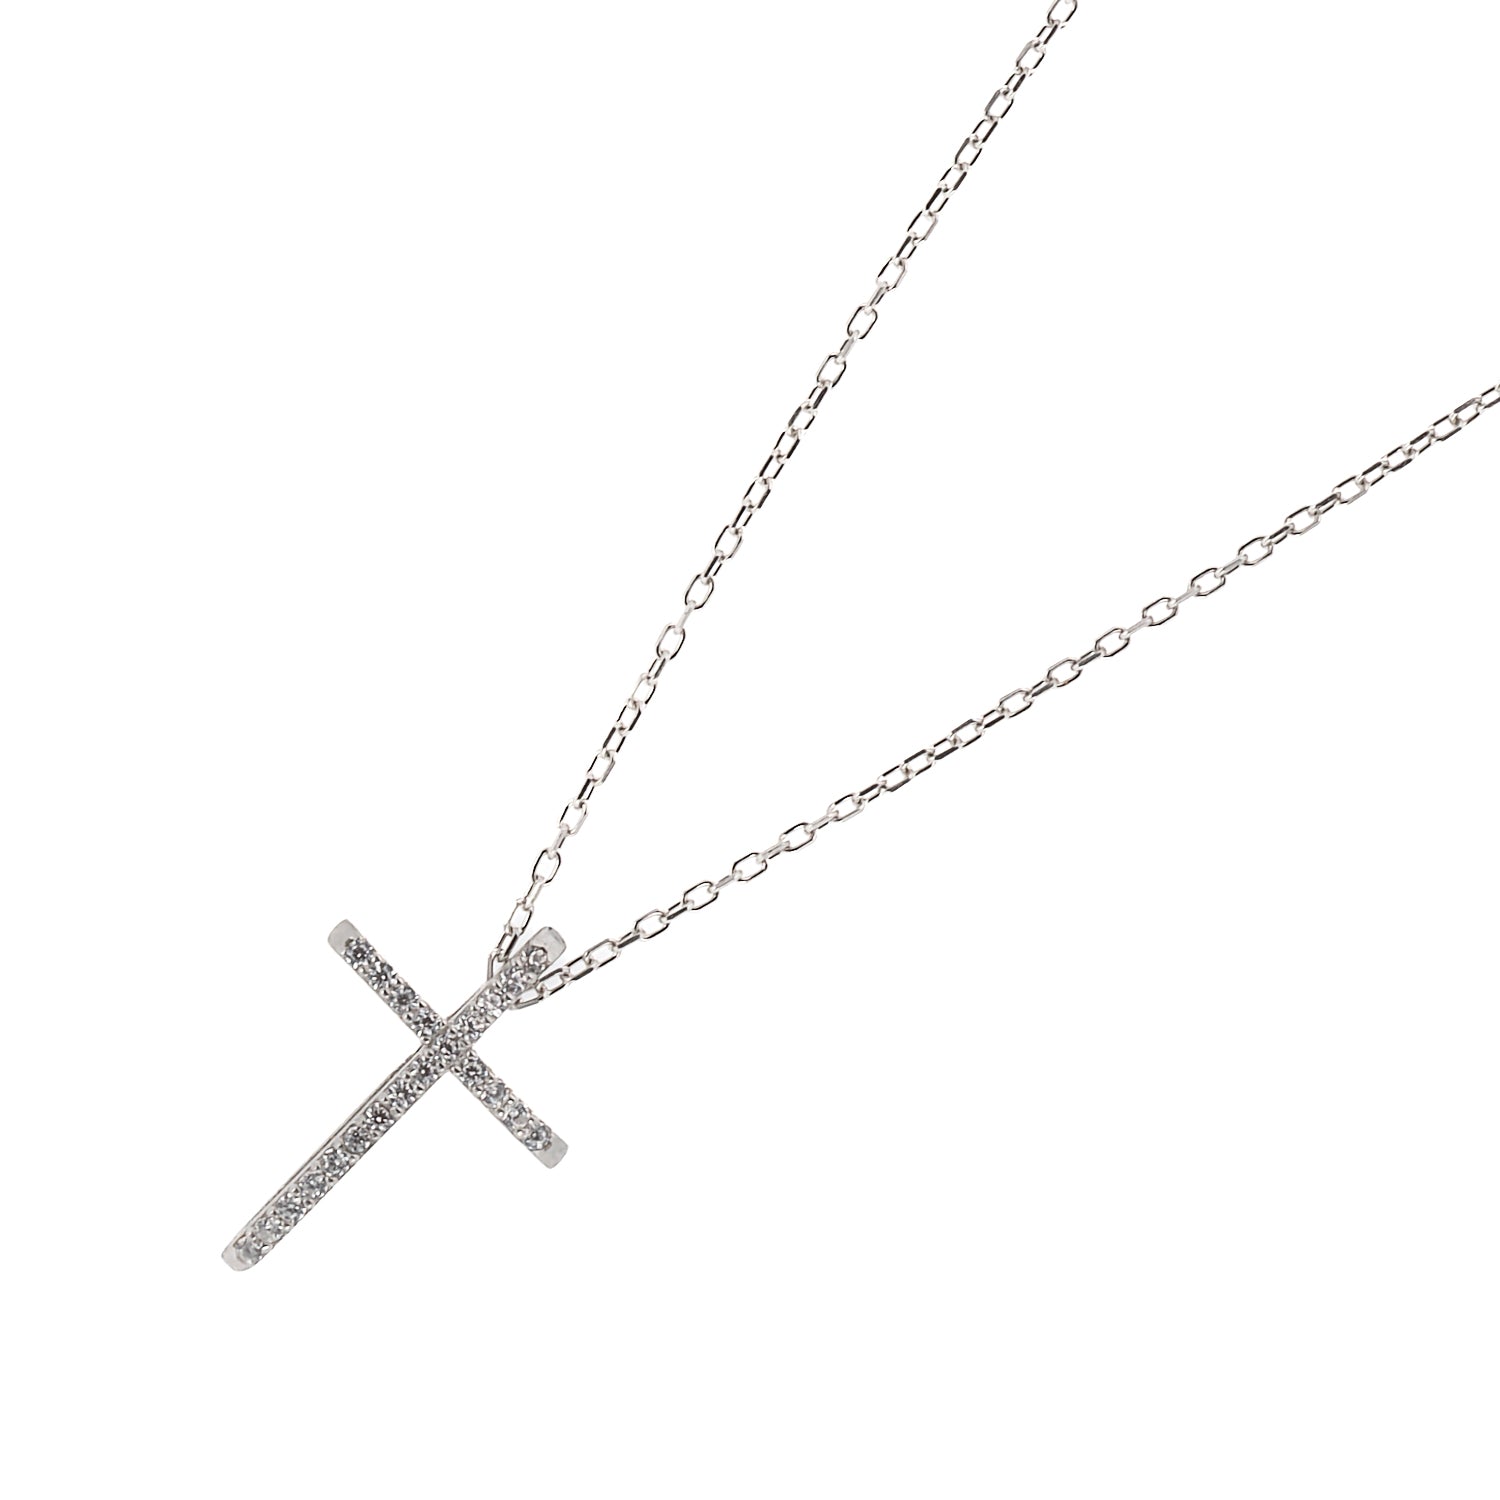 The Unique Cross Diamond Necklace, a meaningful and beautiful accessory.